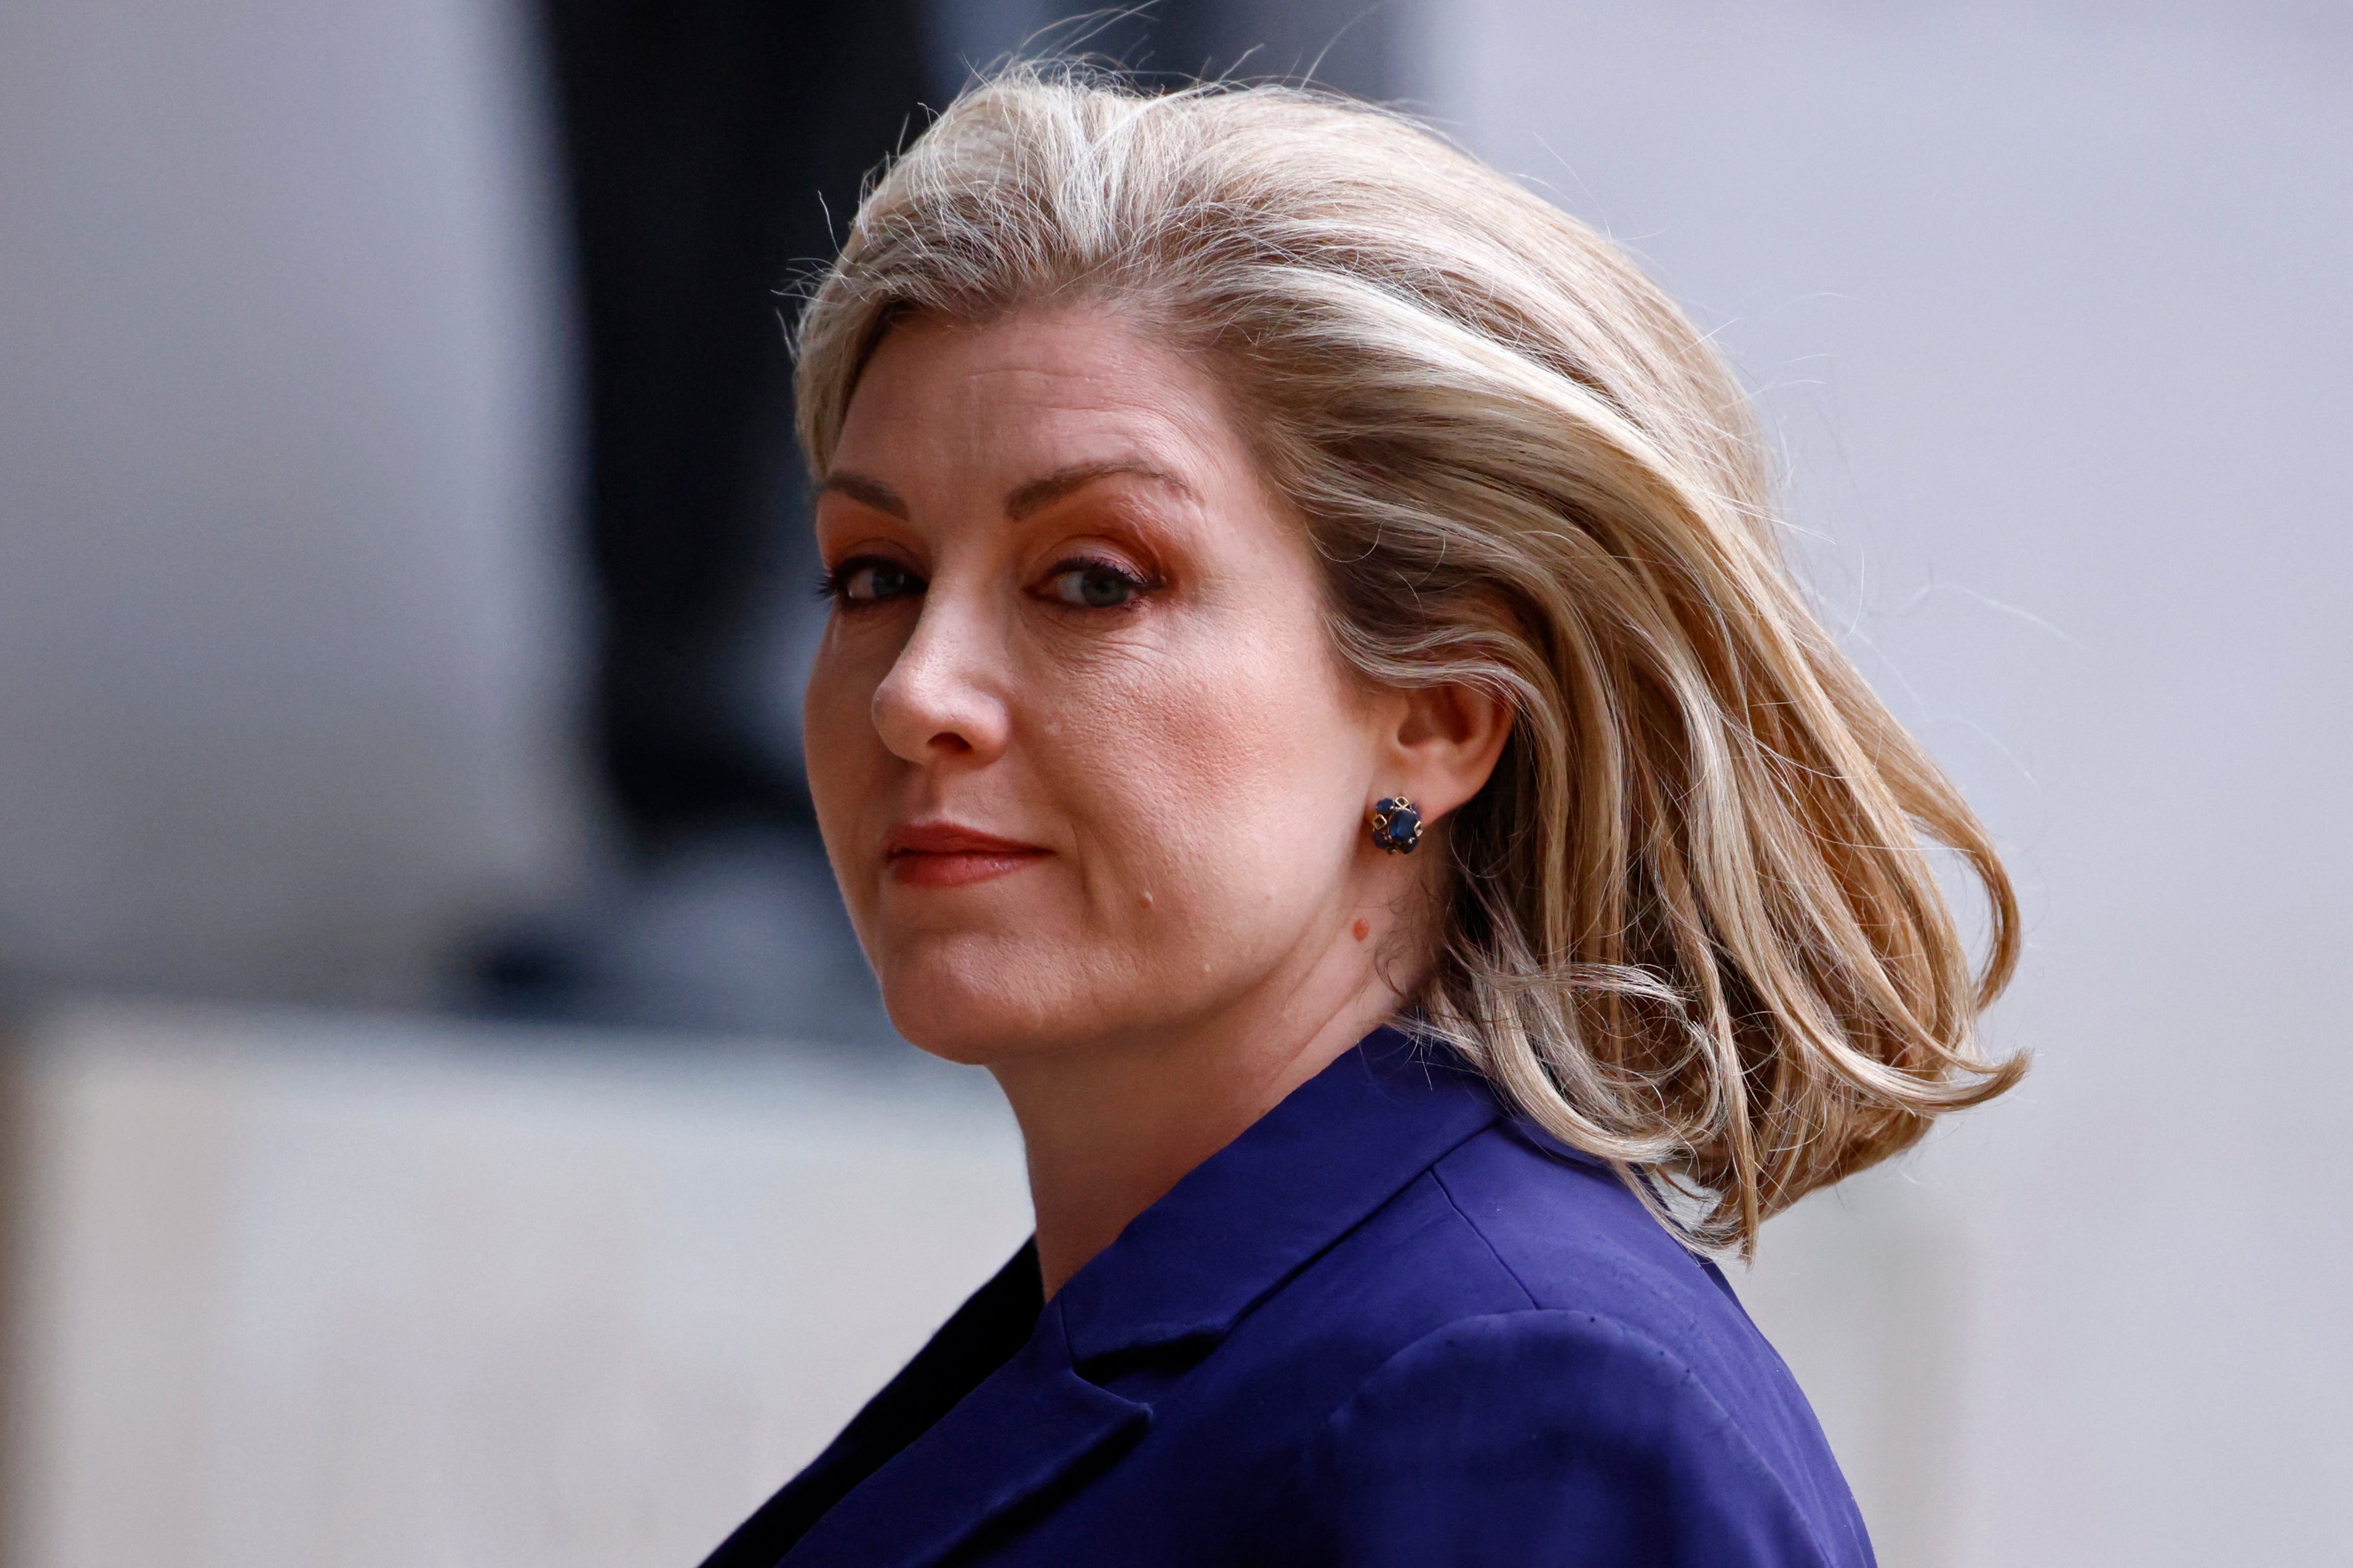 Penny Mordaunt said the election is not a foregone conclusion